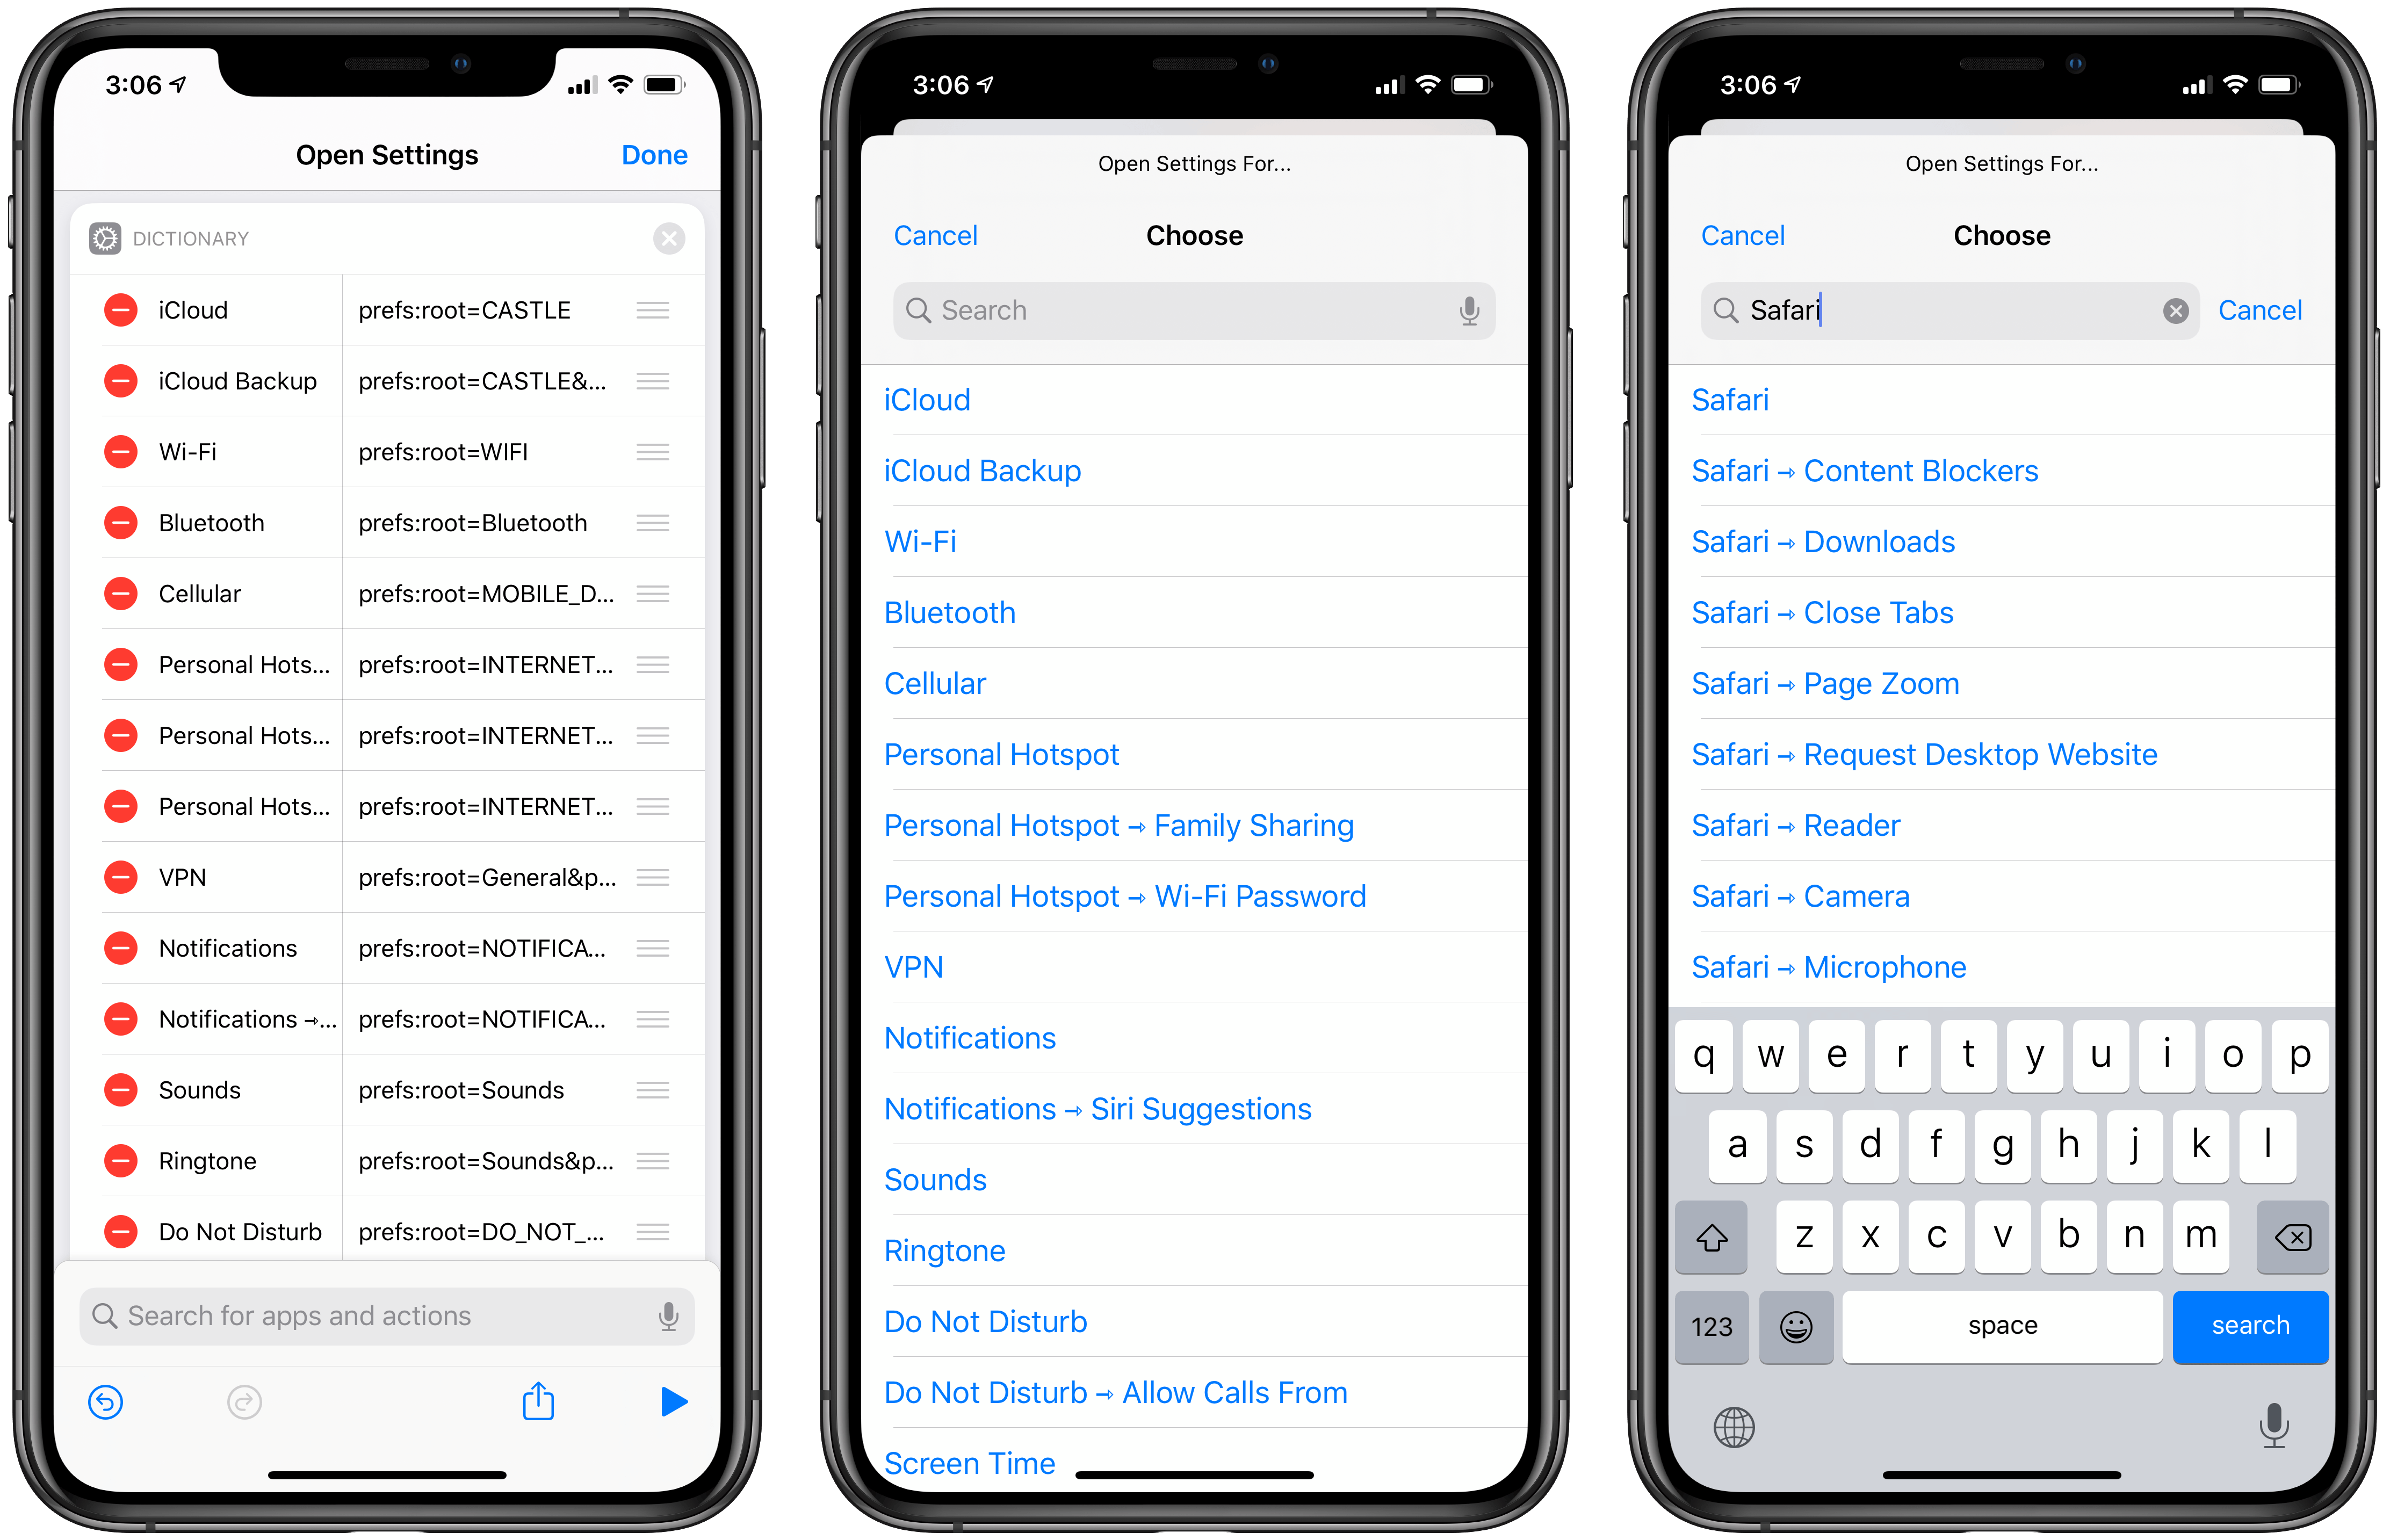 My shortcut to open specific pages of the Settings app. You can take any URL and make a separate shortcut for it.